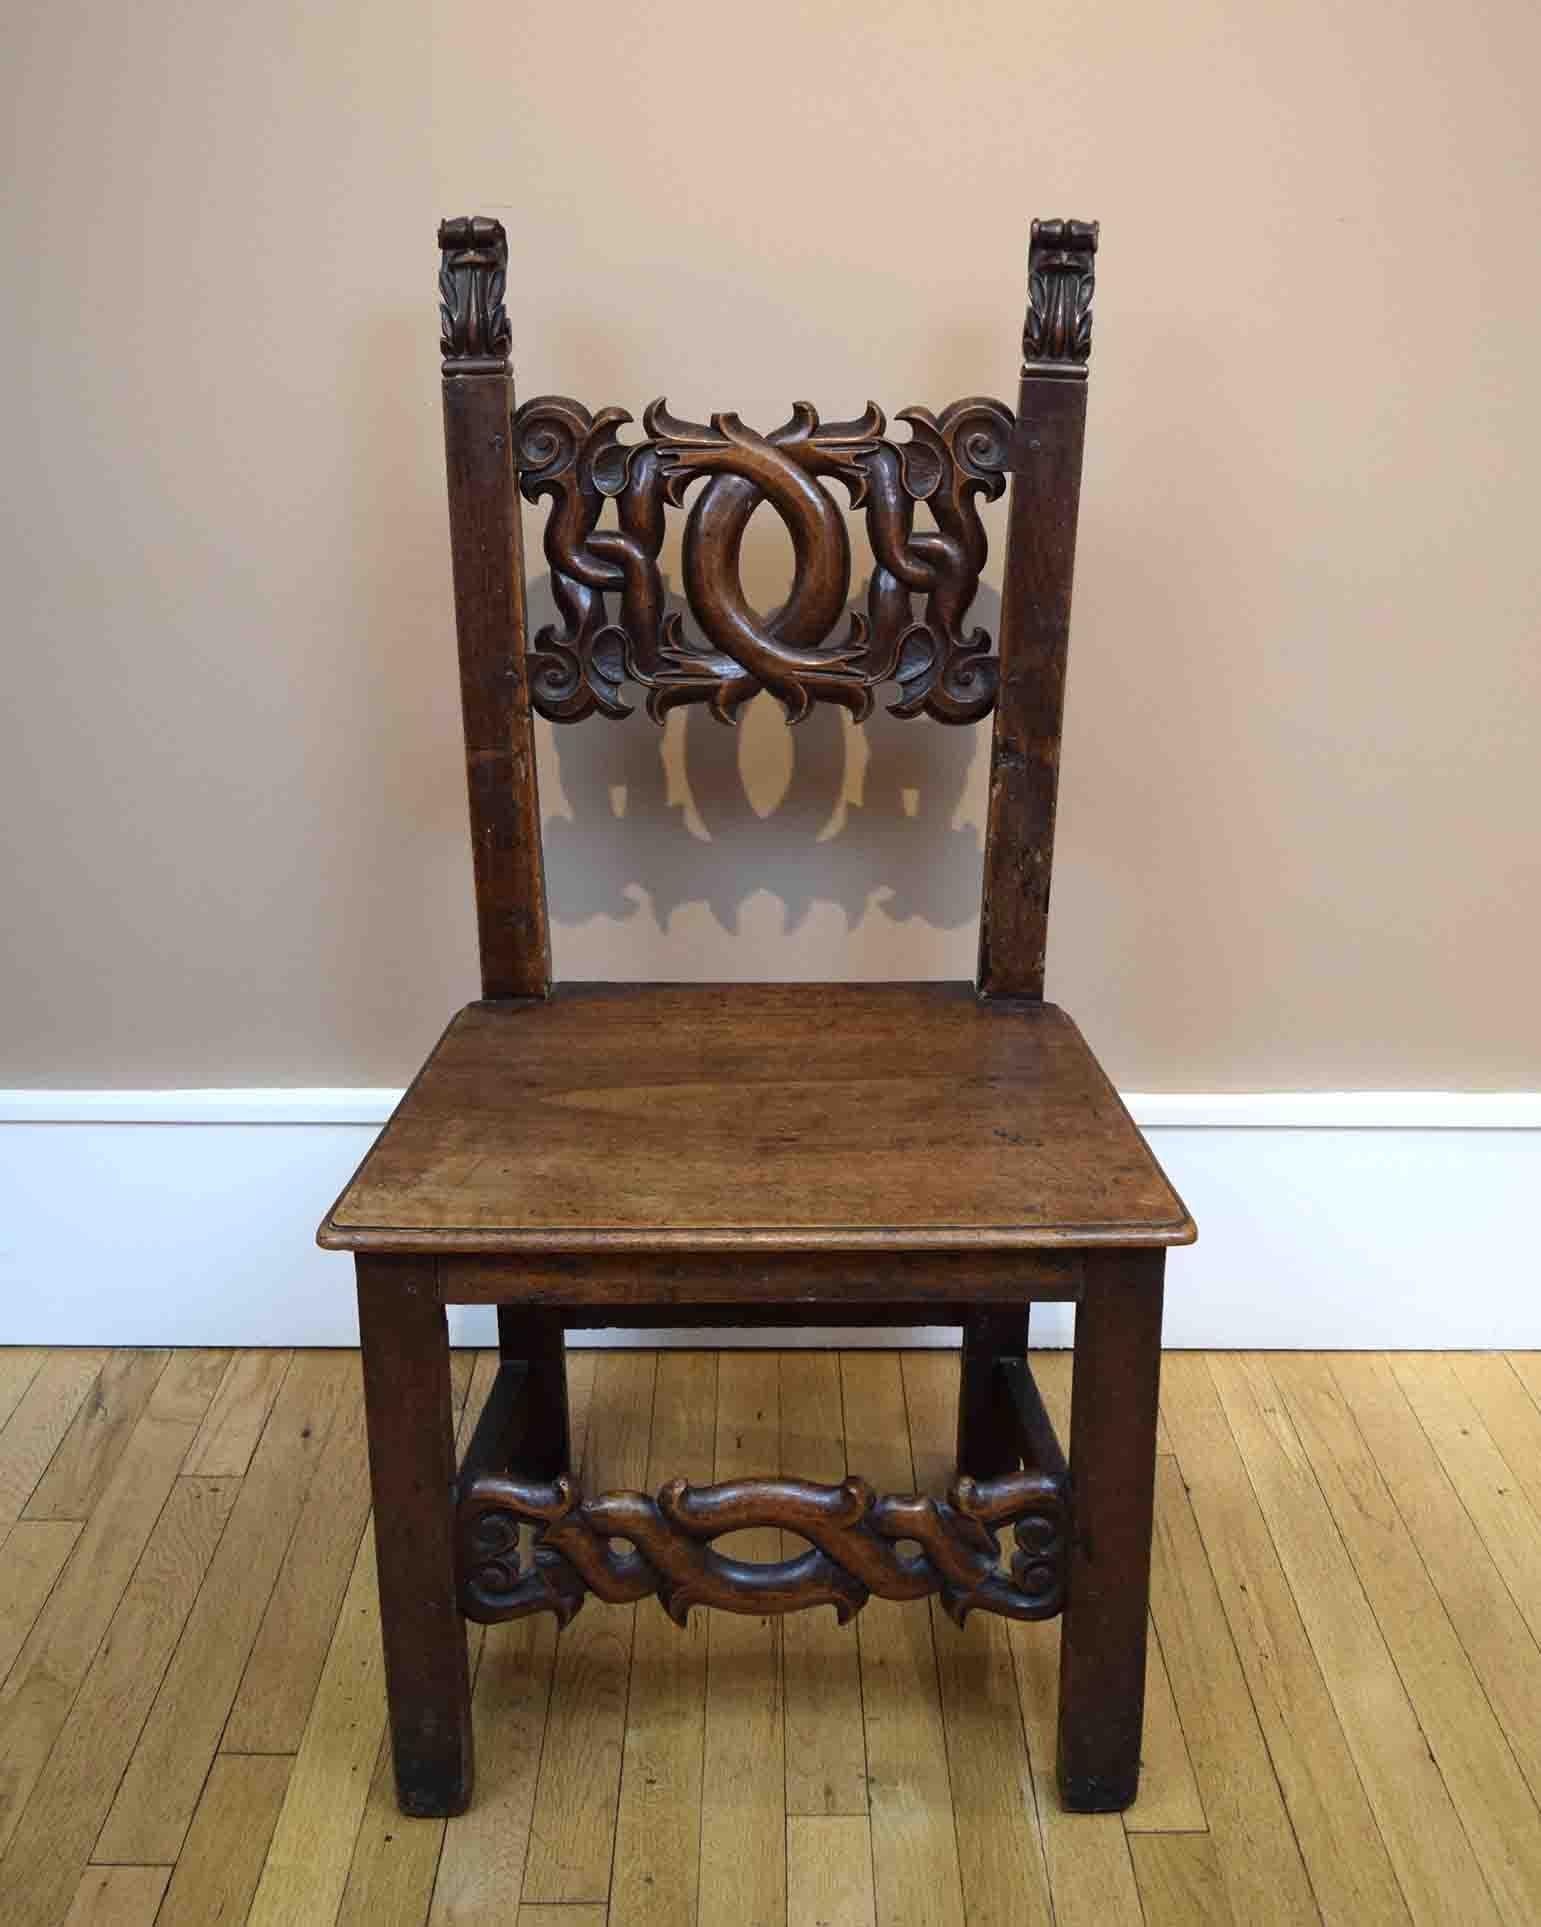 Over the course of five centuries of use, this Italian Renaissance walnut chair has acquired a rich patina. Its austere form is relieved by the sensuously carved back splat and front stretcher. We purchased the chair in Paris from Pierre Le-Tan, the